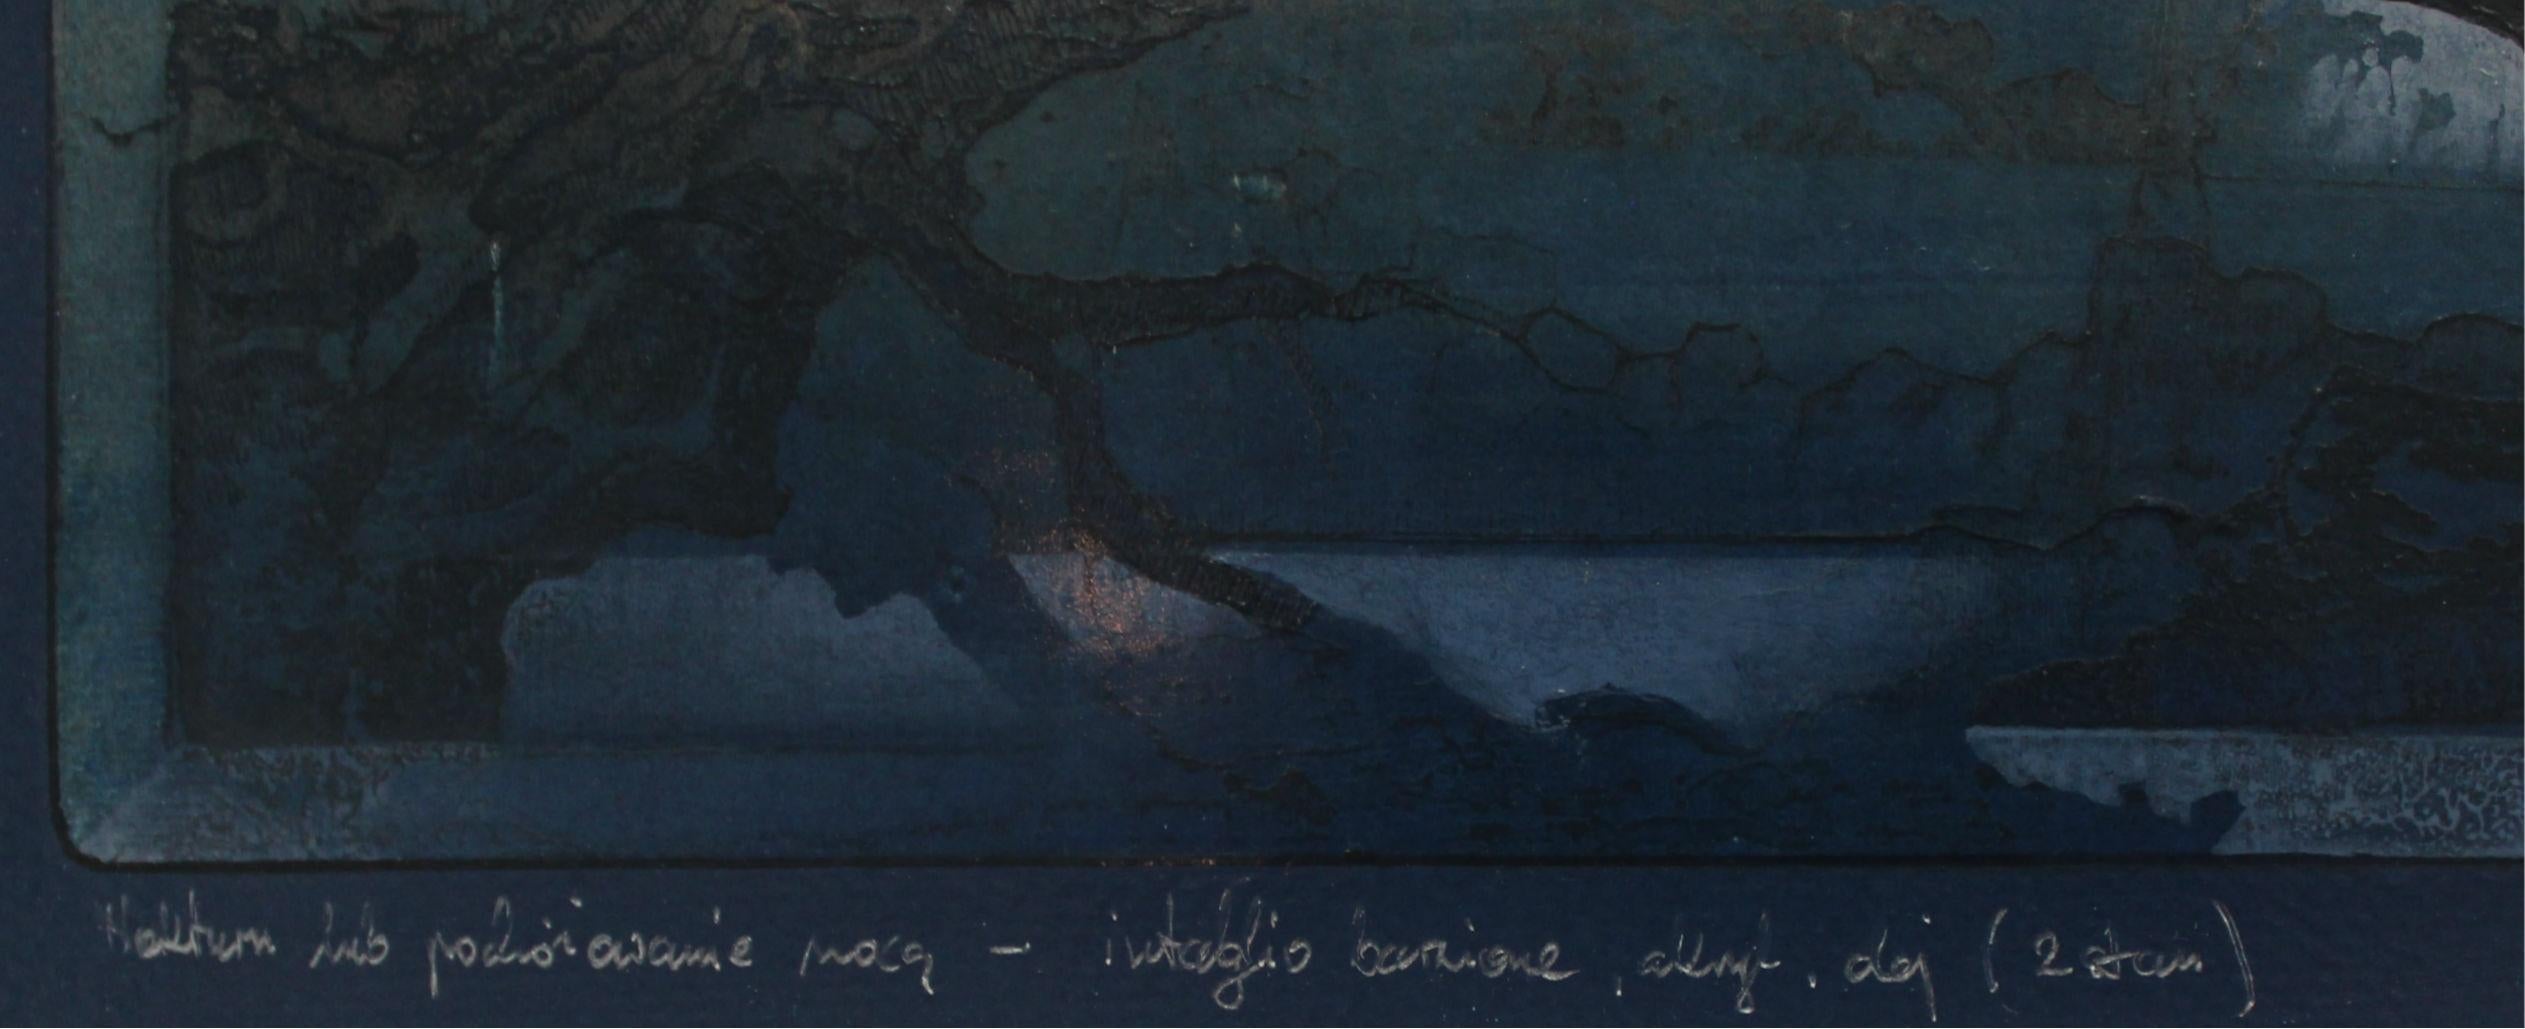 Nocturn or traveling by night - XXI Century, Mixed Media Print, Landscape For Sale 1